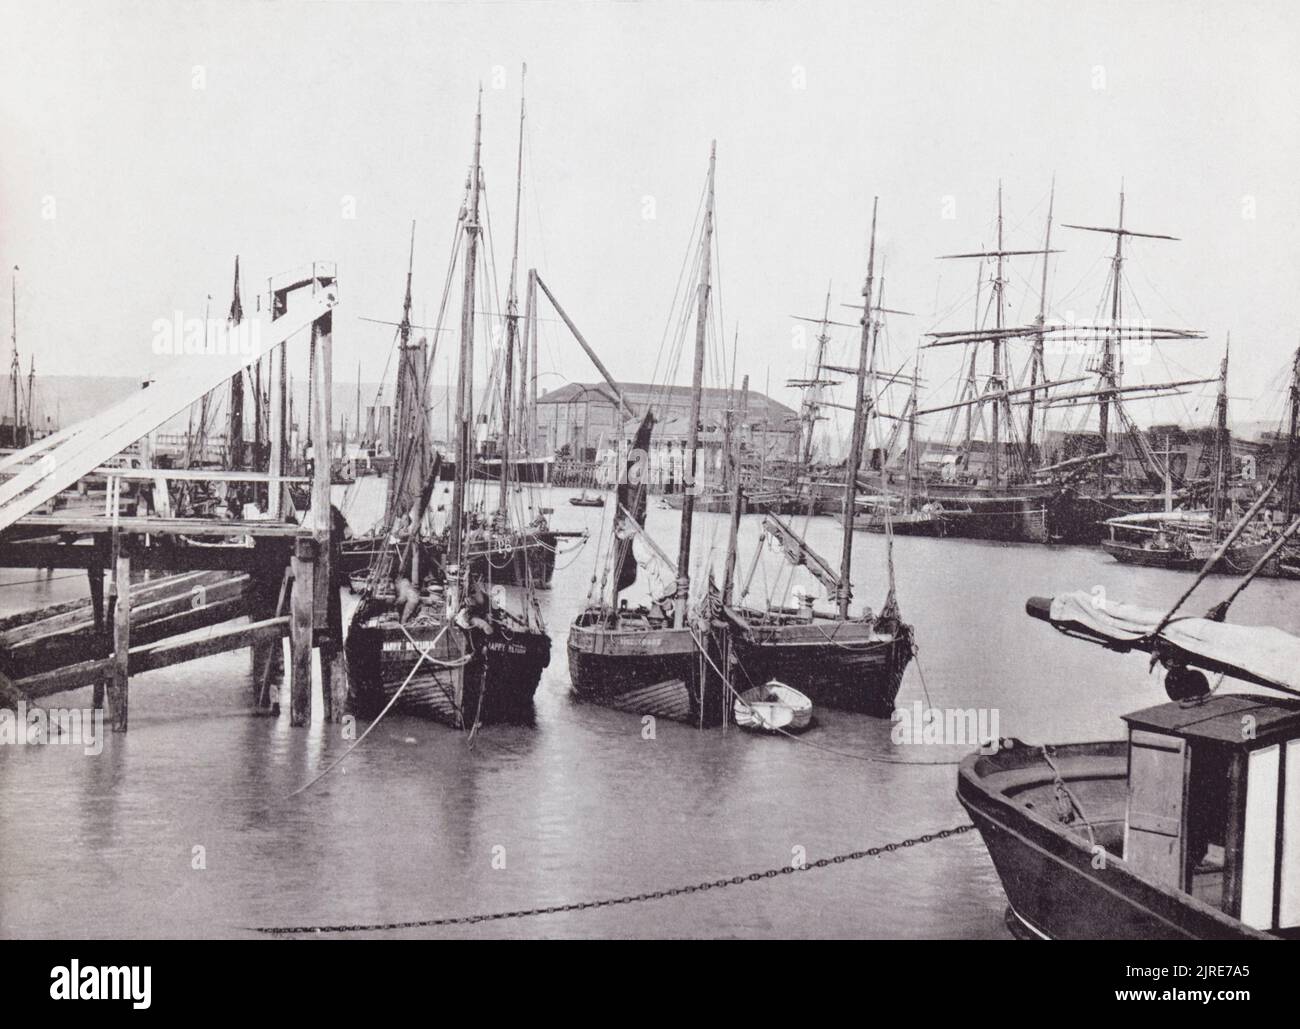 Newhaven, East Sussex, England.  View of the harbour in the 19th century.  From Around The Coast,  An Album of Pictures from Photographs of the Chief Seaside Places of Interest in Great Britain and Ireland.  published London, 1895, by George Newnes Limited. Stock Photo